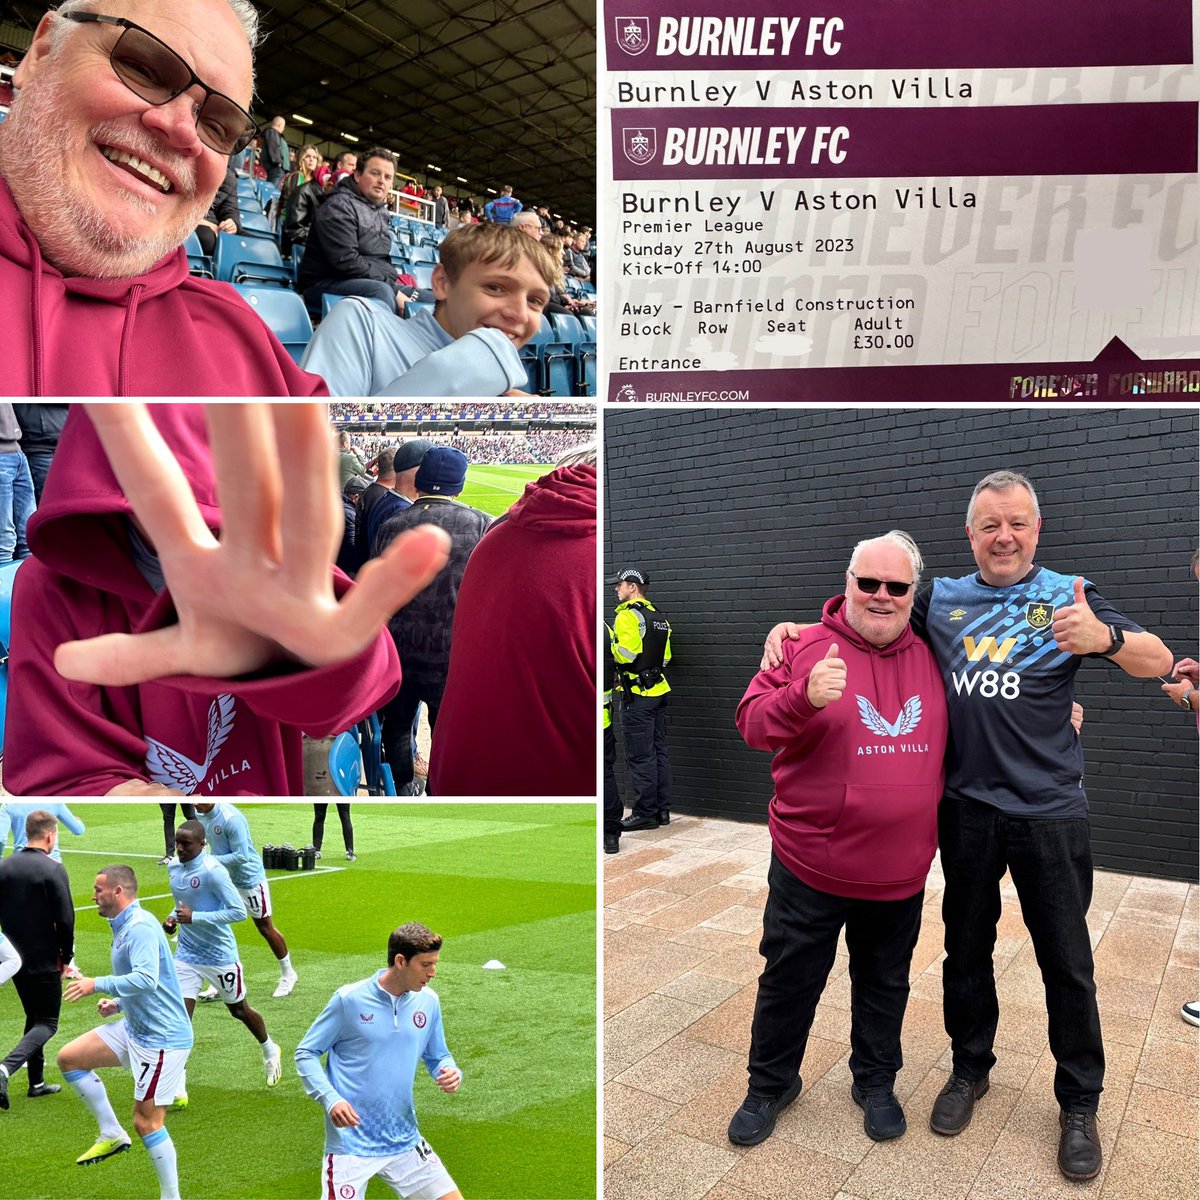 For balance: The lad & I went to Burnley (A) yesterday. It was a proper away day. Lots of fun, Turf Moor is a good stadium (& our happy place 😂) But, safe, even parking a mile from the ground! M65, J10 is closer to Blackburn!